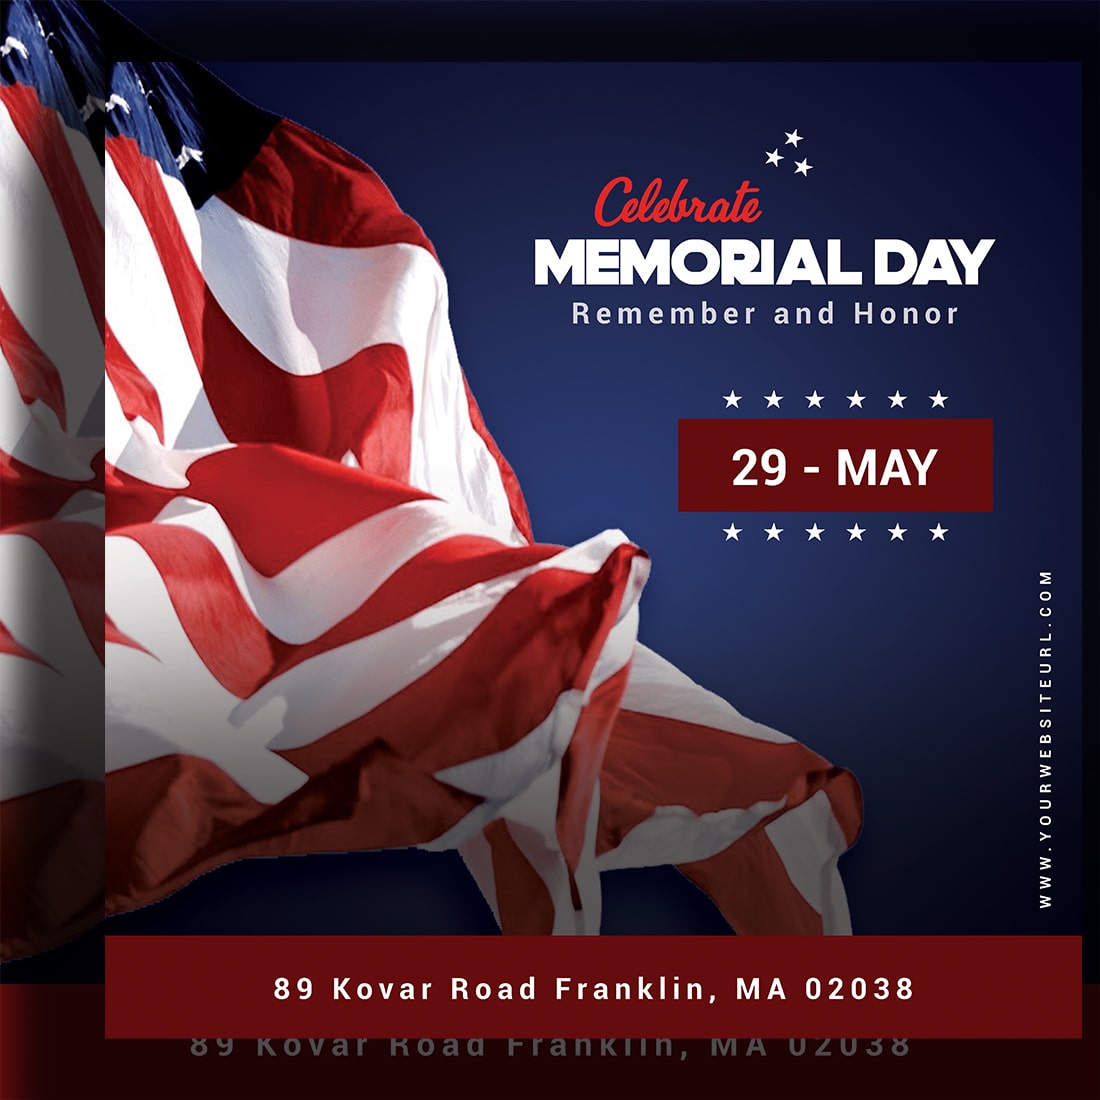 Memorial day poster design preview image.